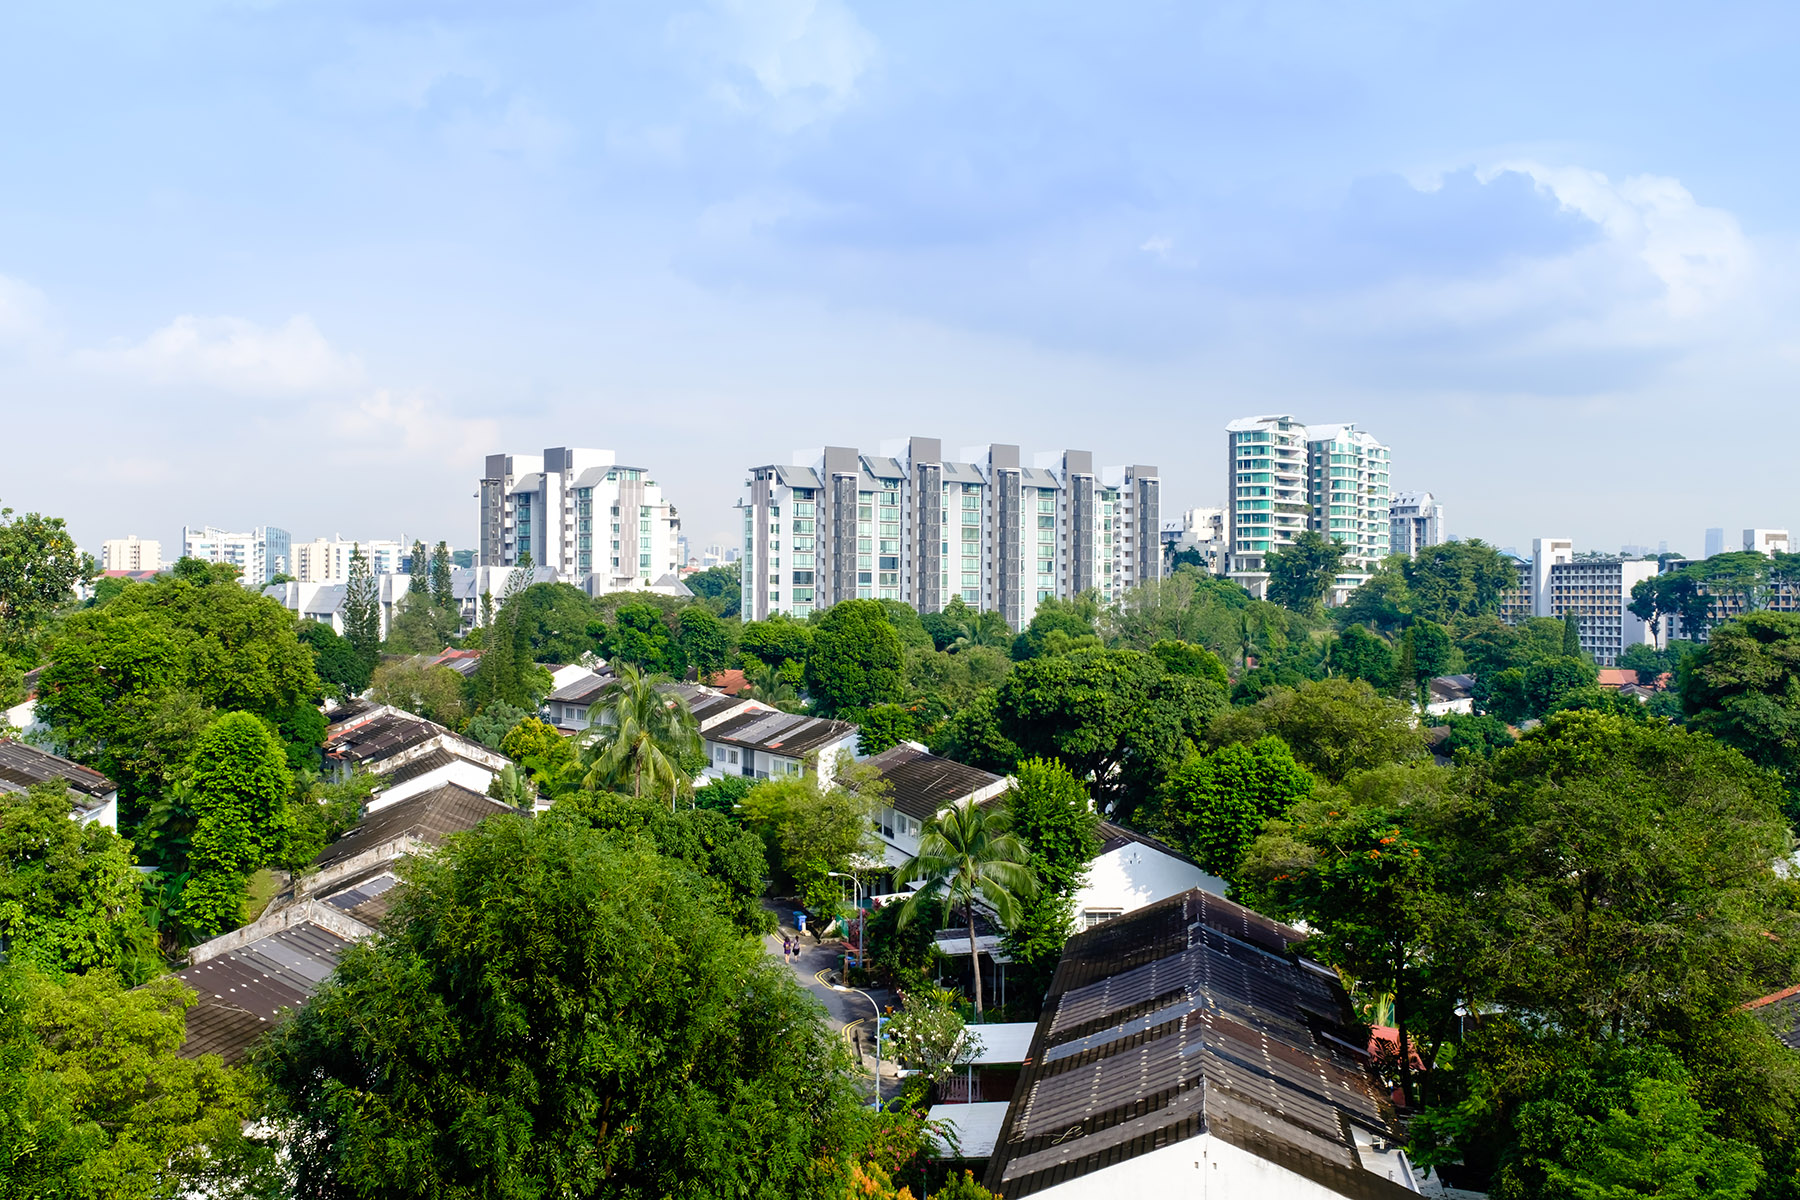 Aerial view of houses between lush greenery and high rise apartments on the horizon in Singapore